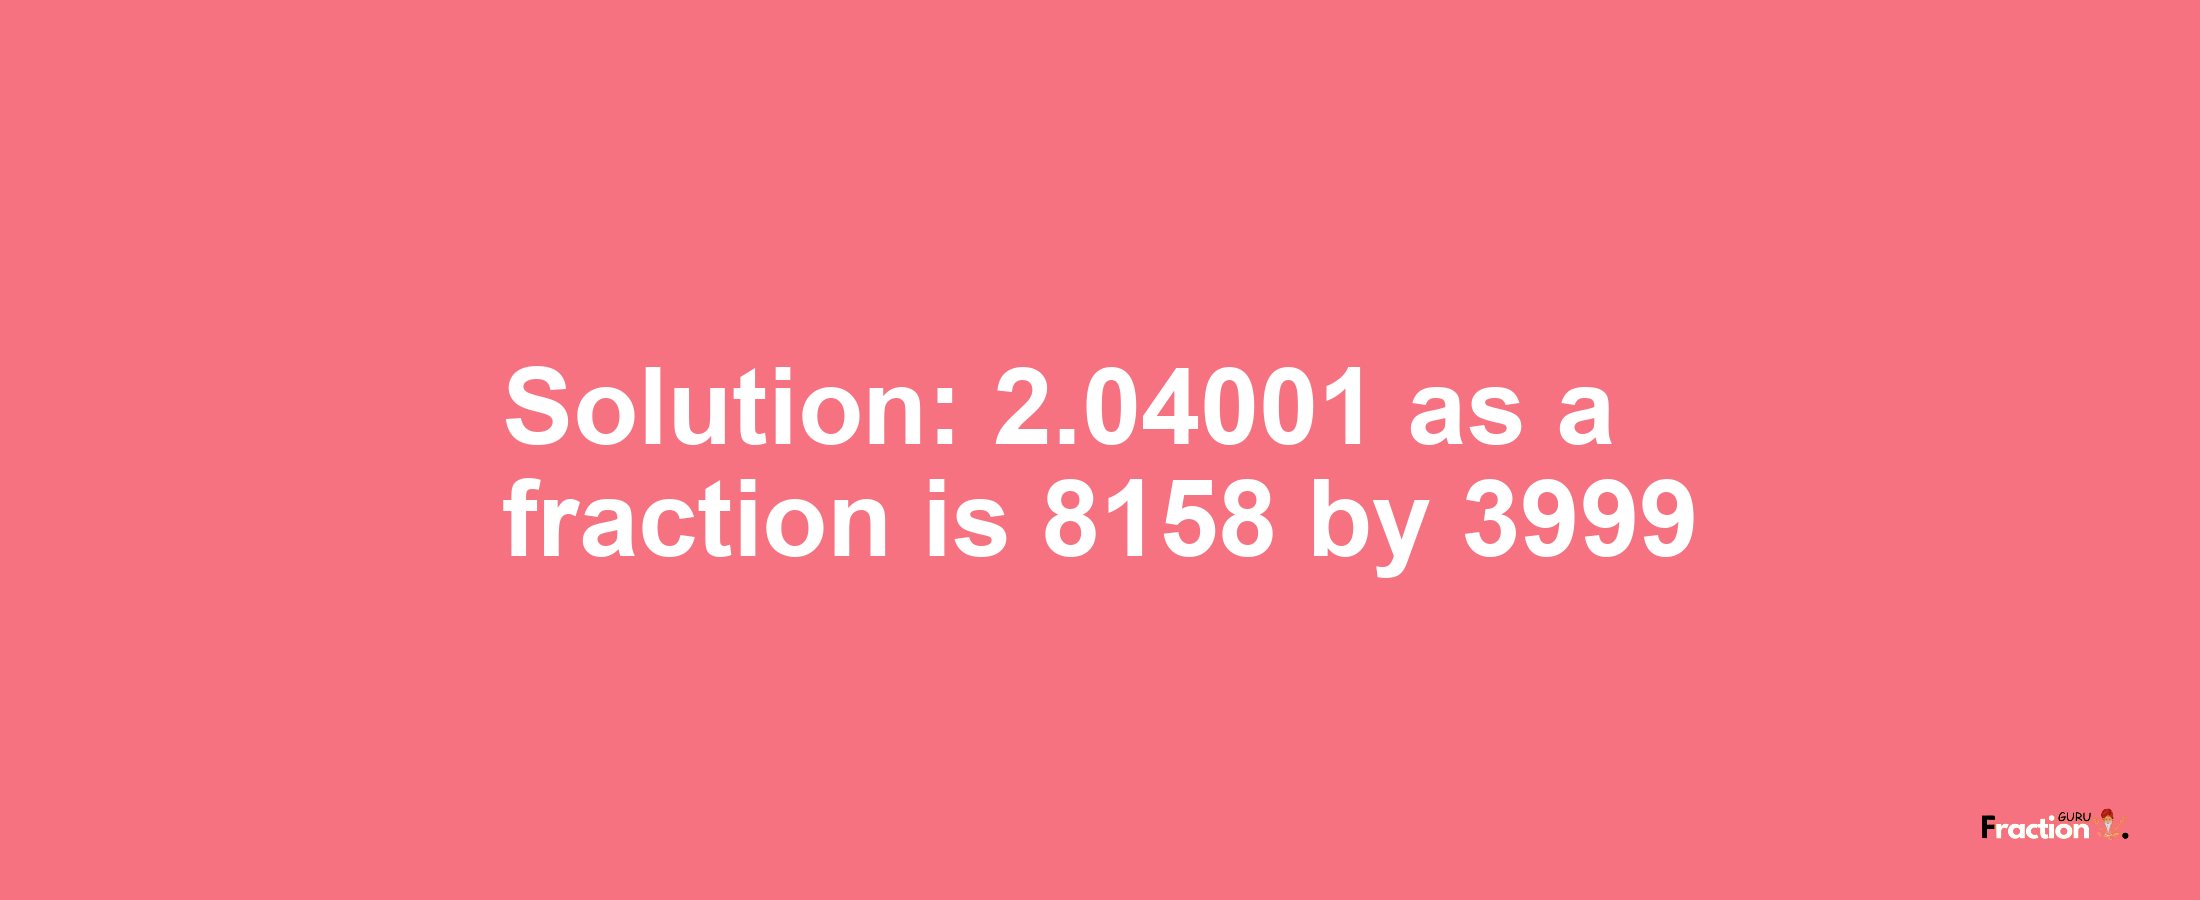 Solution:2.04001 as a fraction is 8158/3999